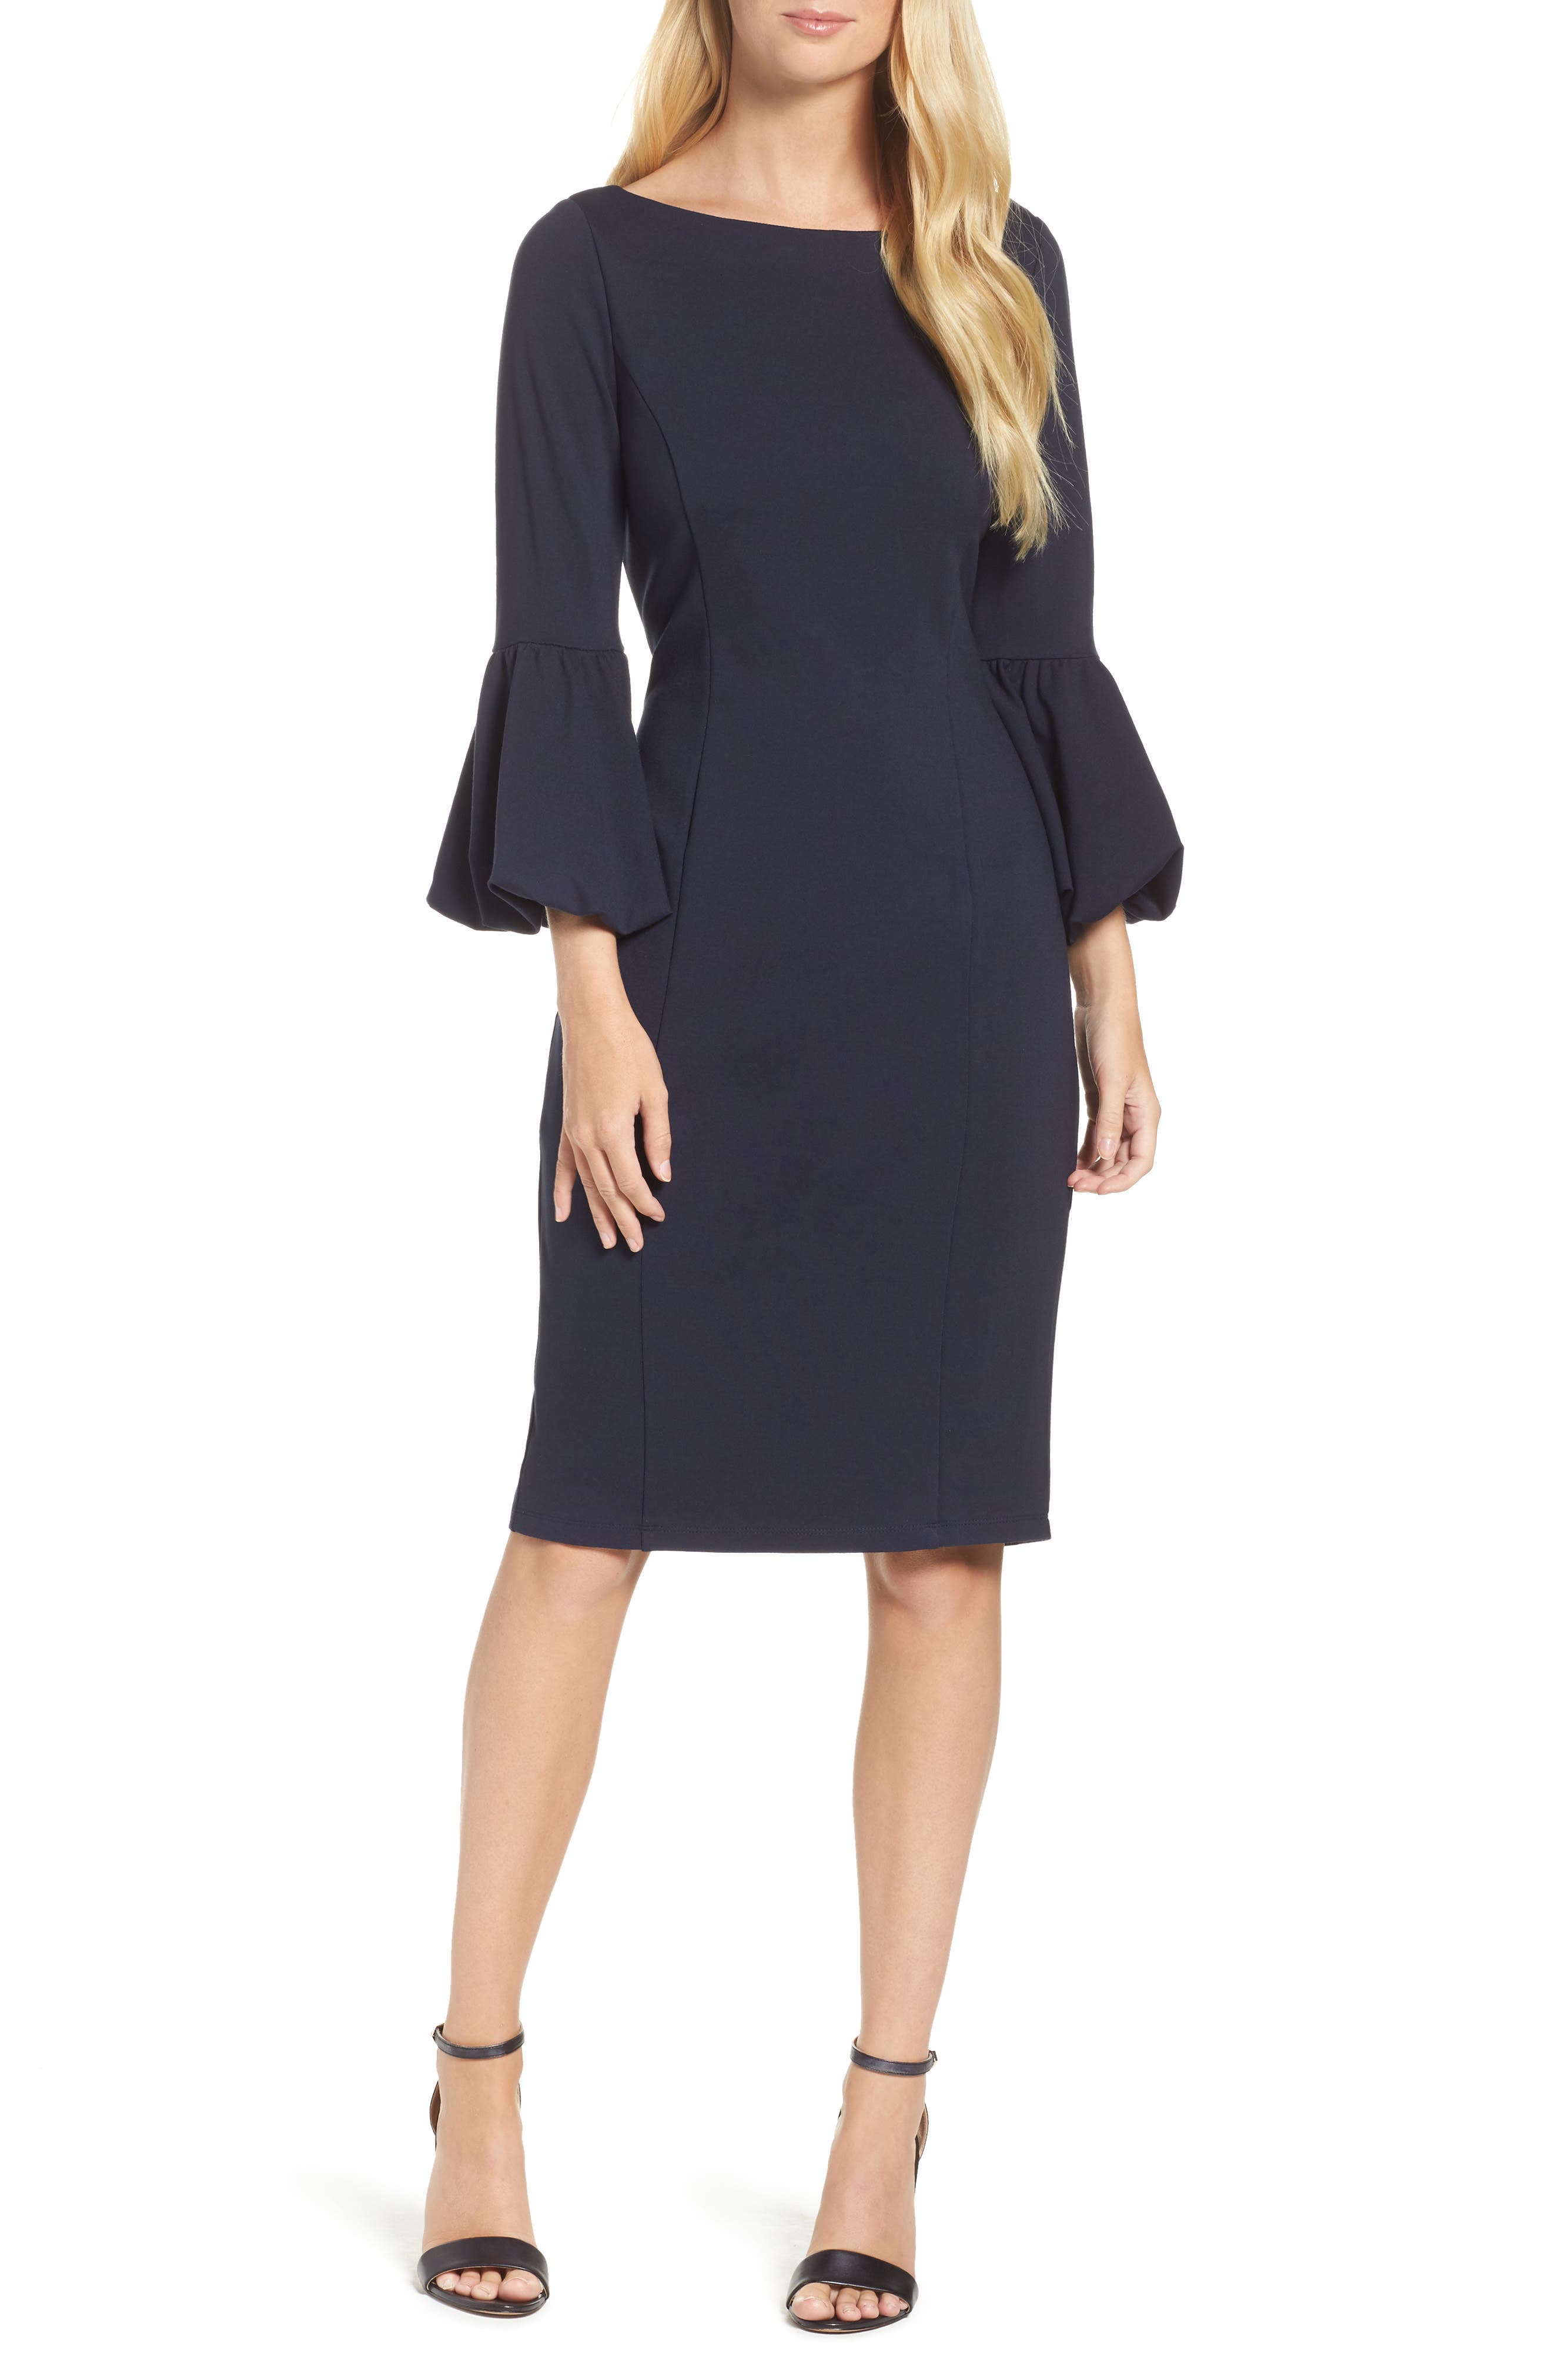 Eliza J Womens Off The Shoulder Sheath Dress with Bell Sleeves